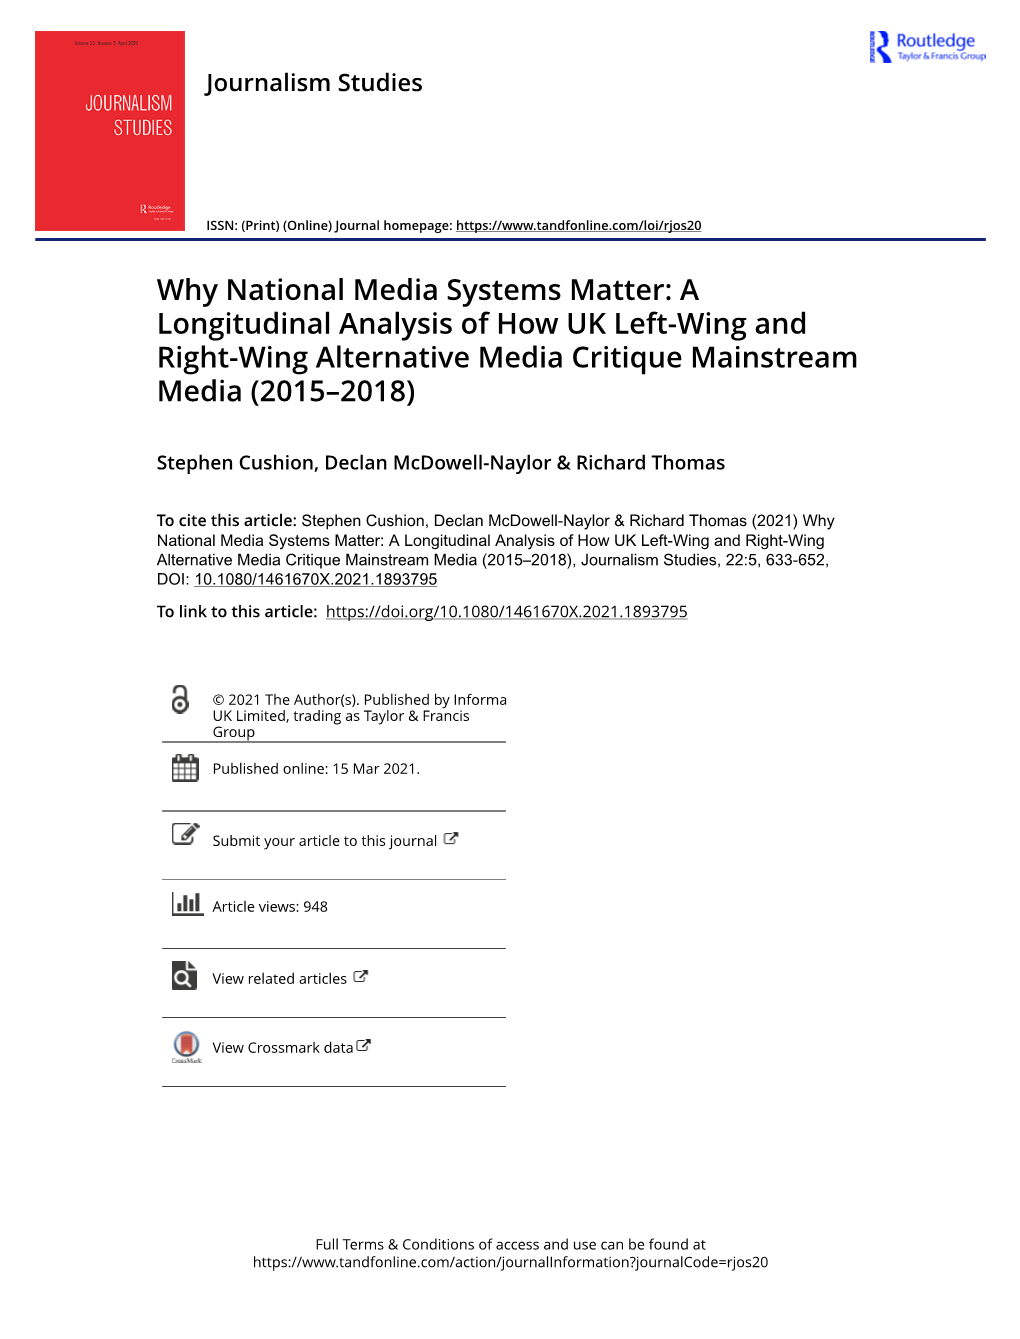 A Longitudinal Analysis of How UK Left-Wing and Right-Wing Alternative Media Critique Mainstream Media (2015–2018)